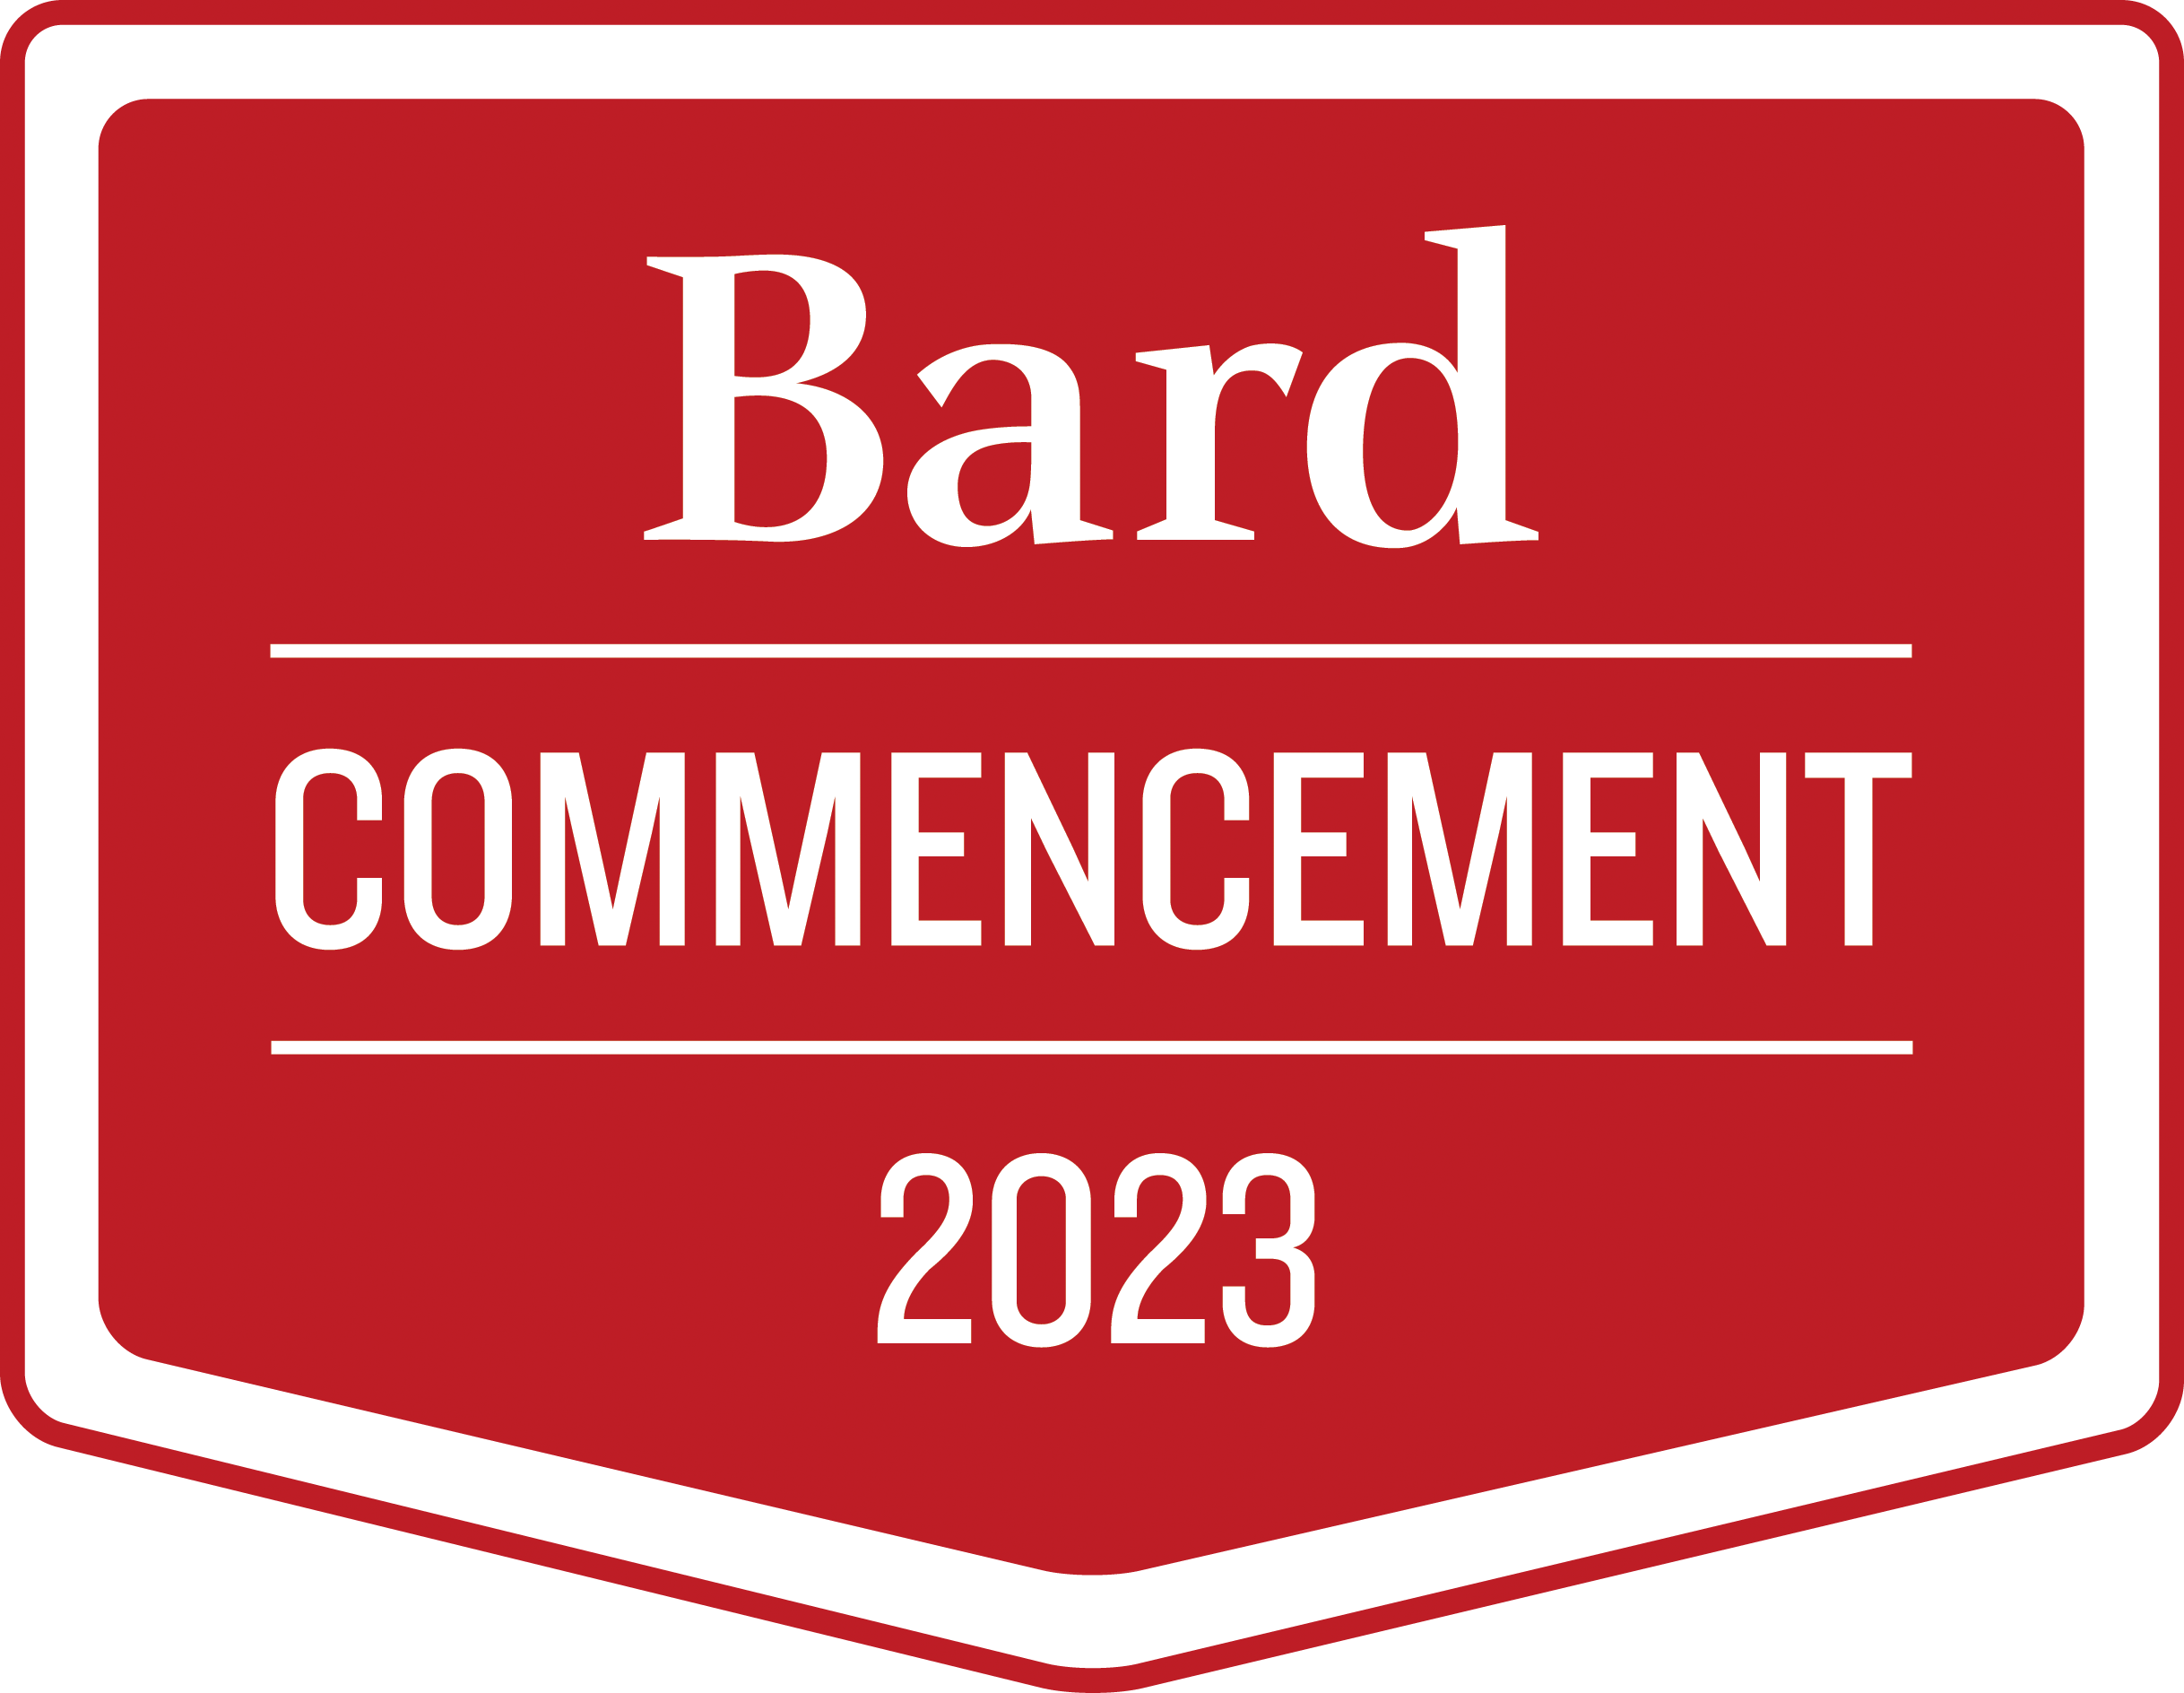 Bard Commencement 2023